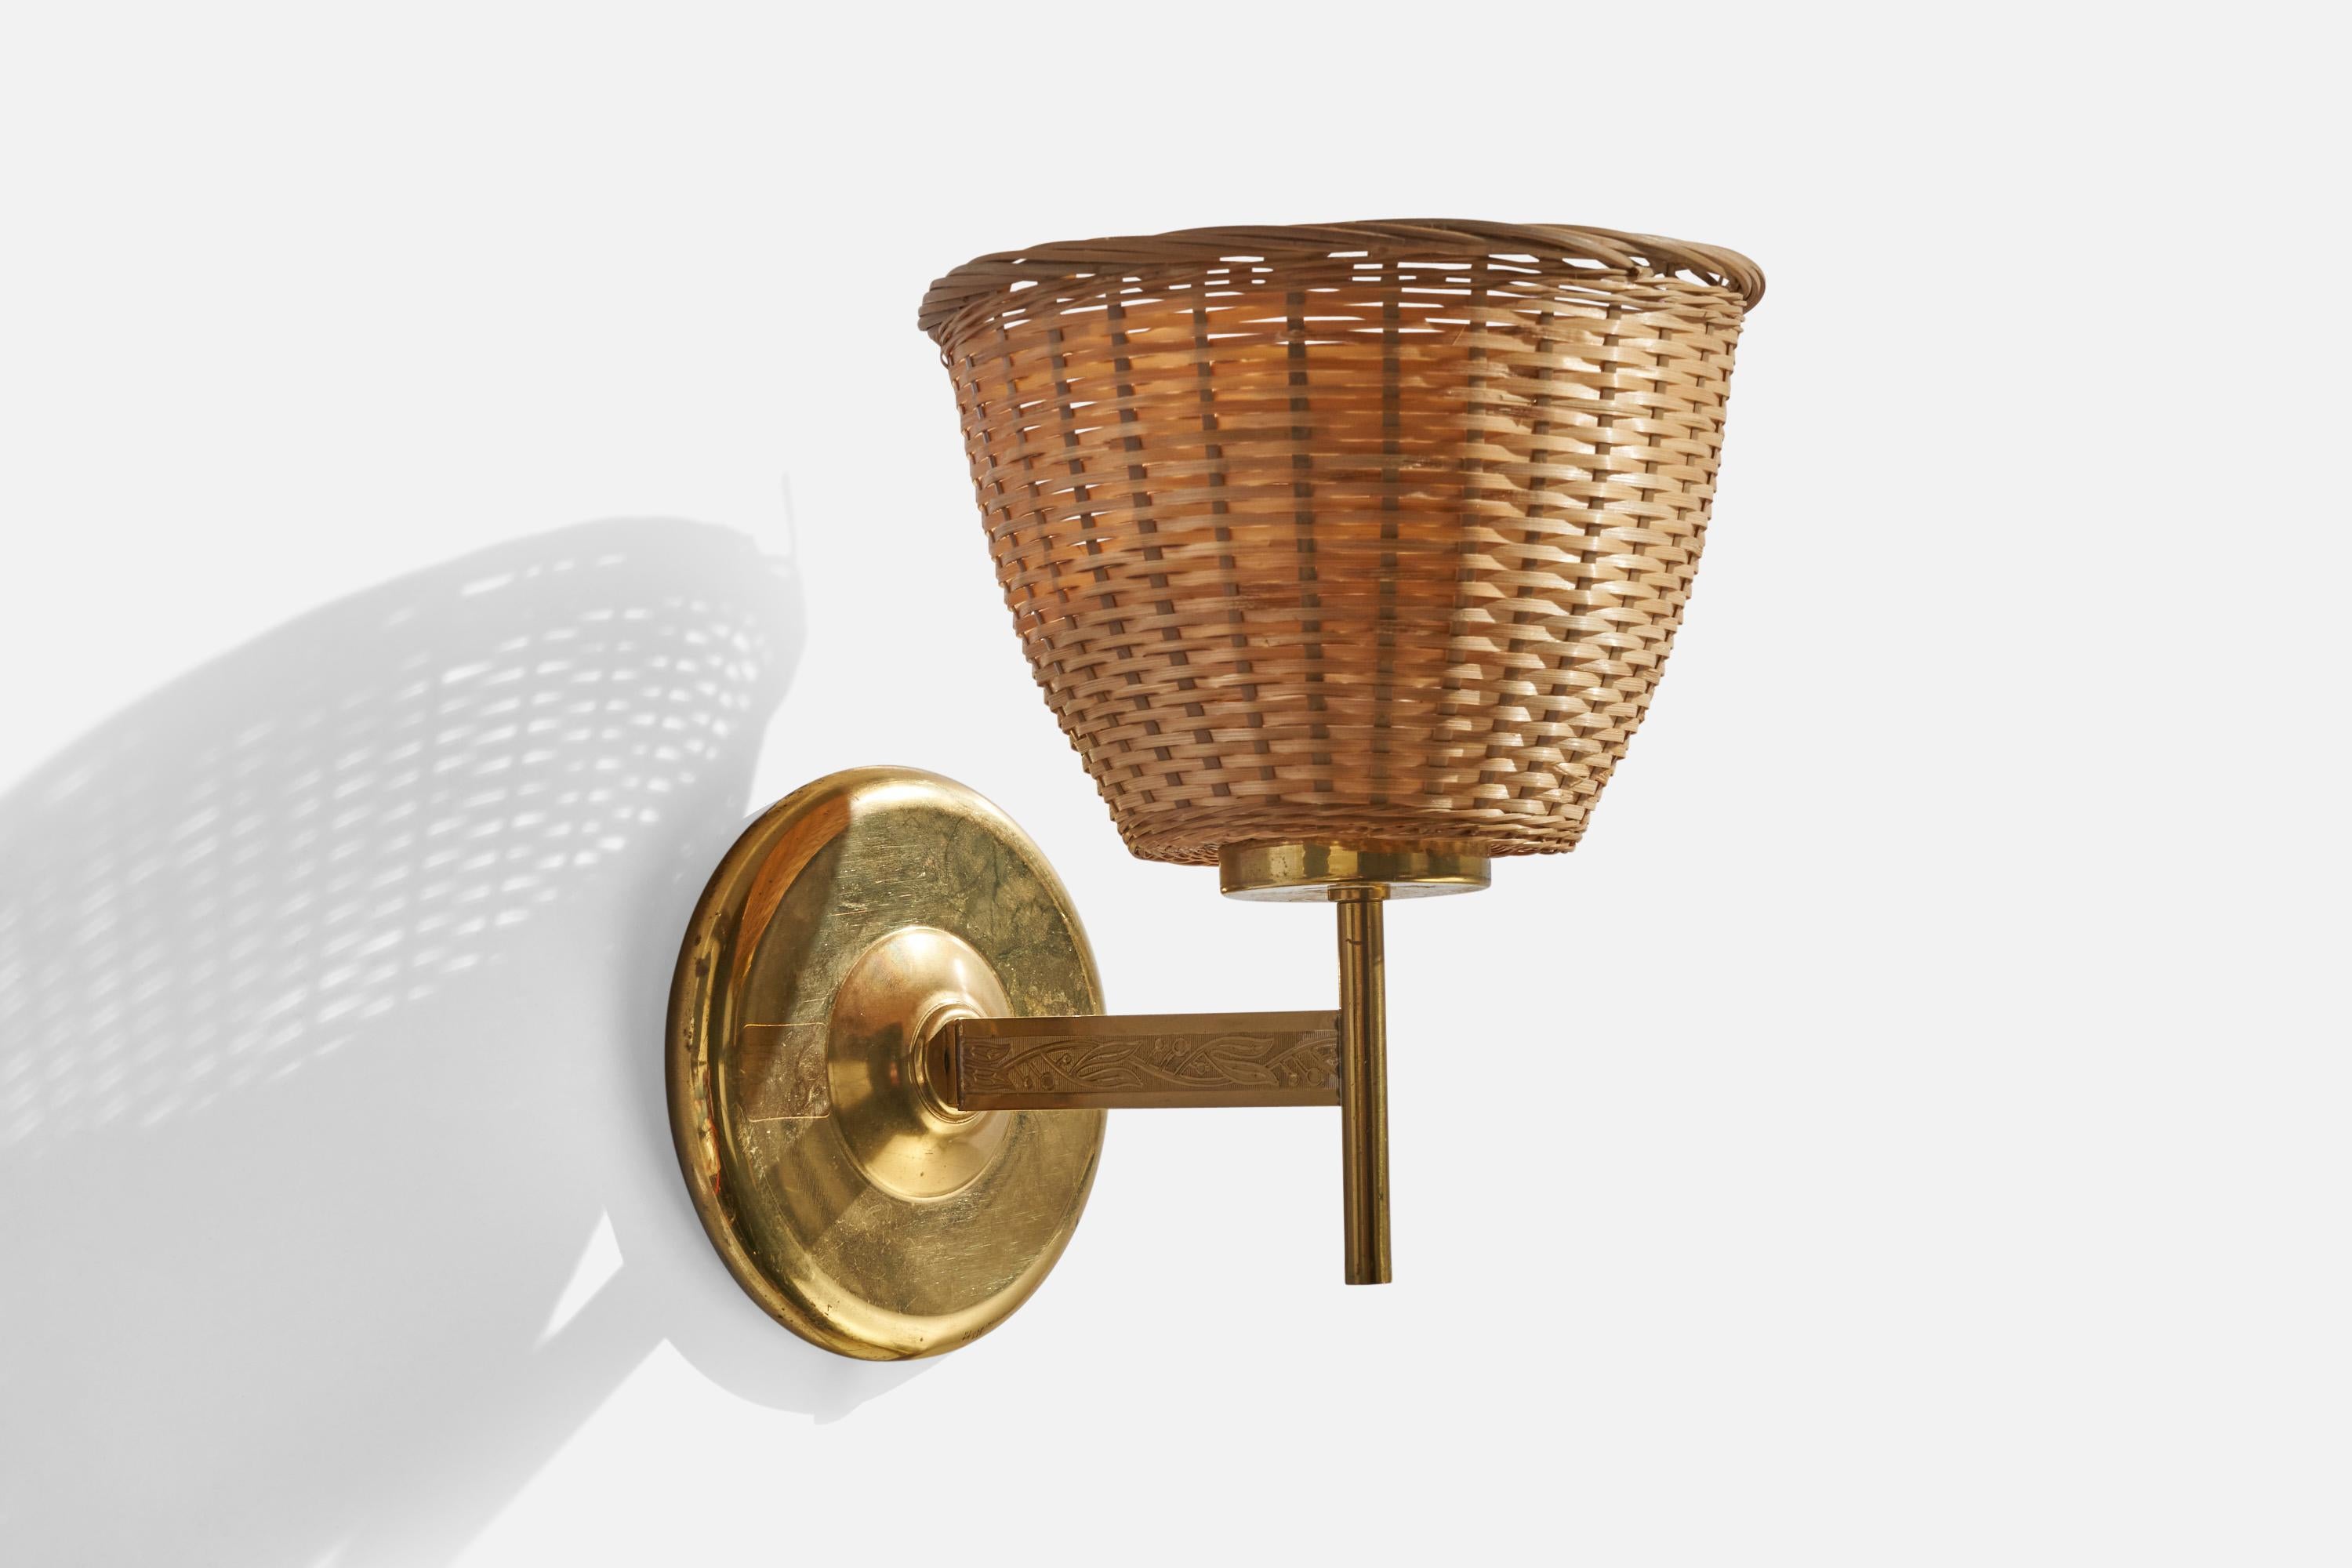 A brass and rattan wall light designed and produced in Sweden, 1960s.

Overall Dimensions (inches): 9” H x 6.75”  W x 9” D
Back Plate Dimensions (inches): 5”  H x 5” W x .75” D
Bulb Specifications: E-26 Bulb
Number of Sockets: 1
All lighting will be